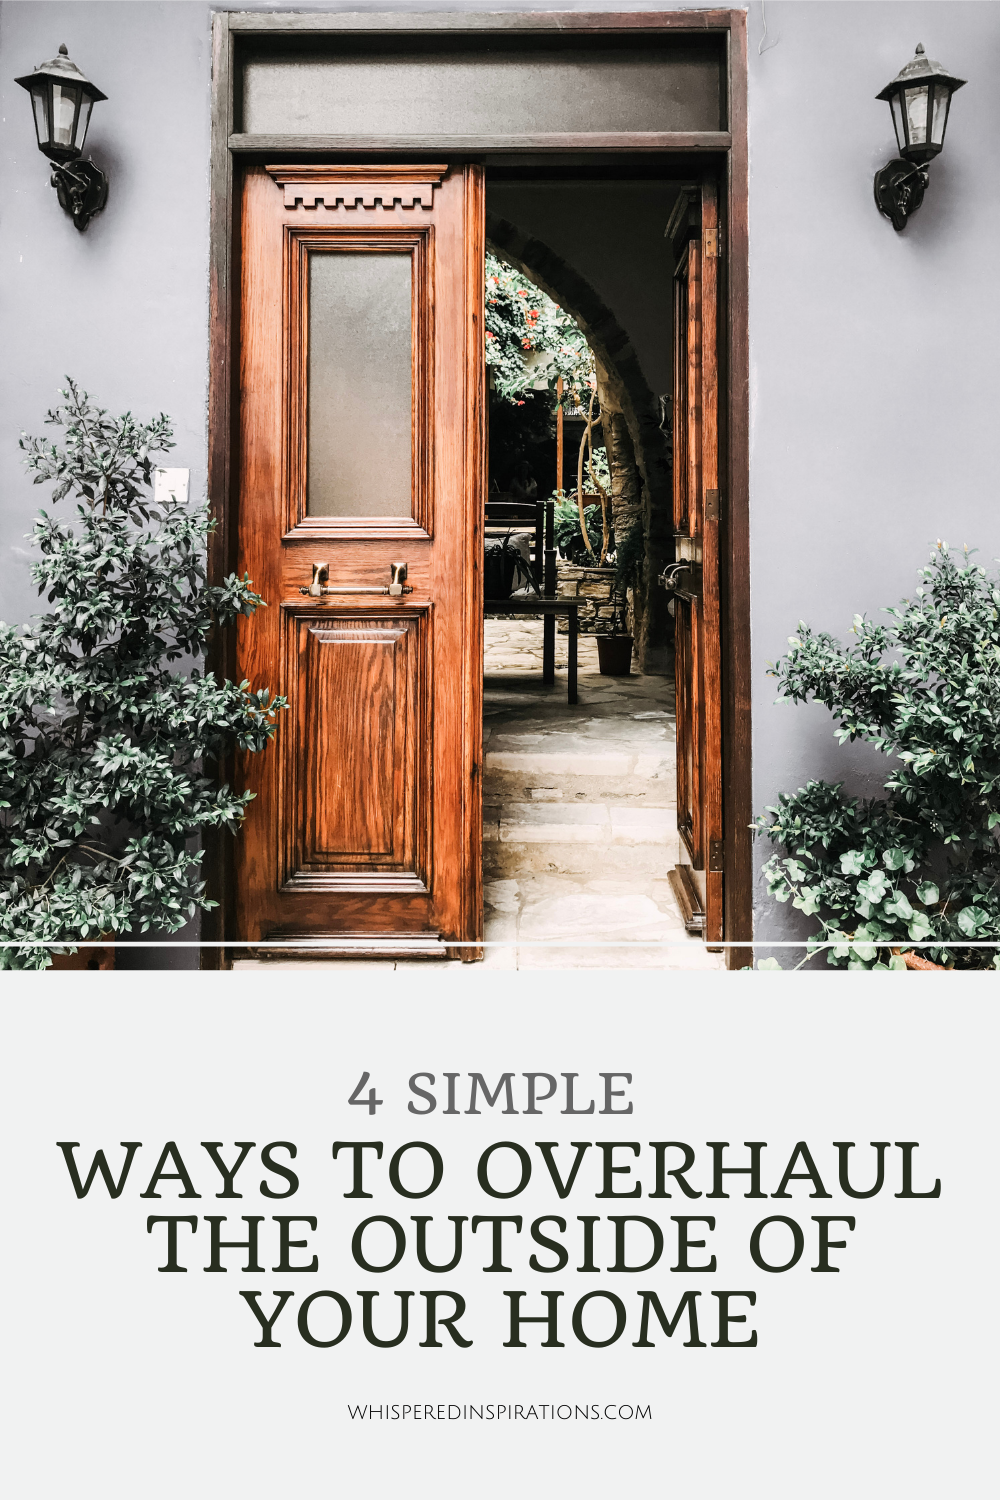 Beautiful wood door is open and the front porch is seen. This article covers 4 simple ways to overhaul the outside of your home.